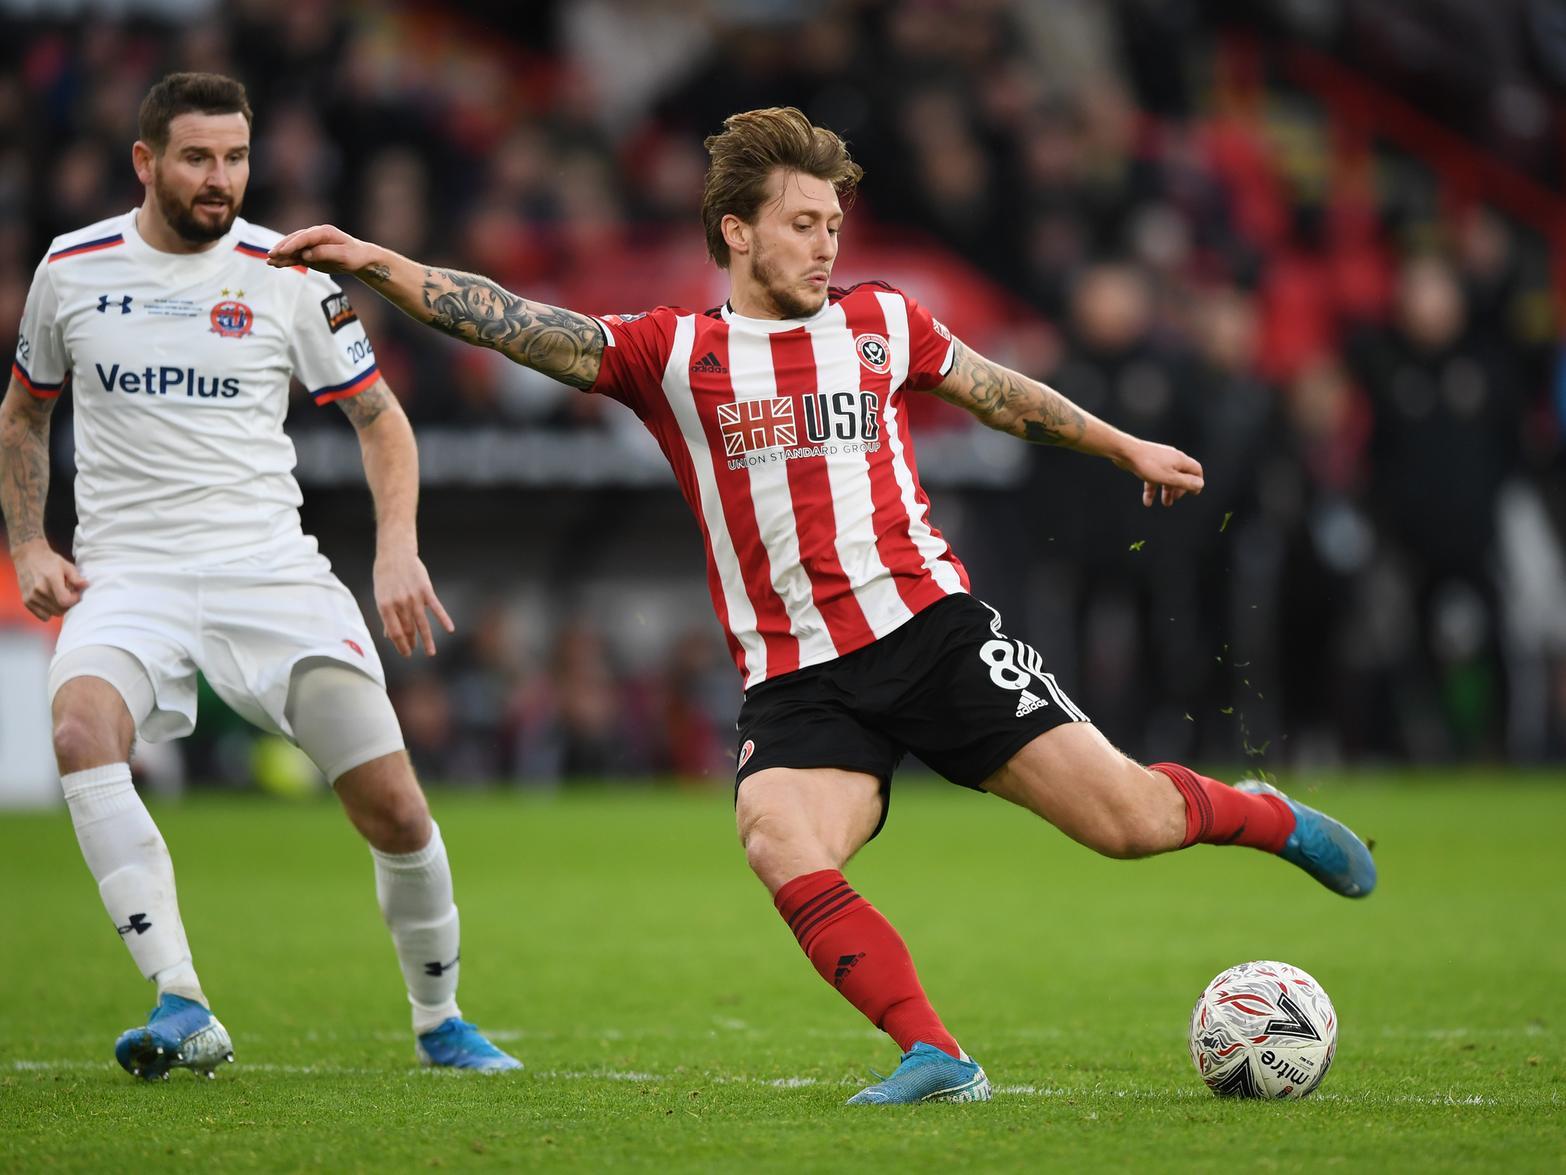 Nottingham Forest are believed to be stepping up their interest in Sheffield United midfielder Luke Freeman, and could rival Leeds United for the 5m former QPR ace. (Football Insider)